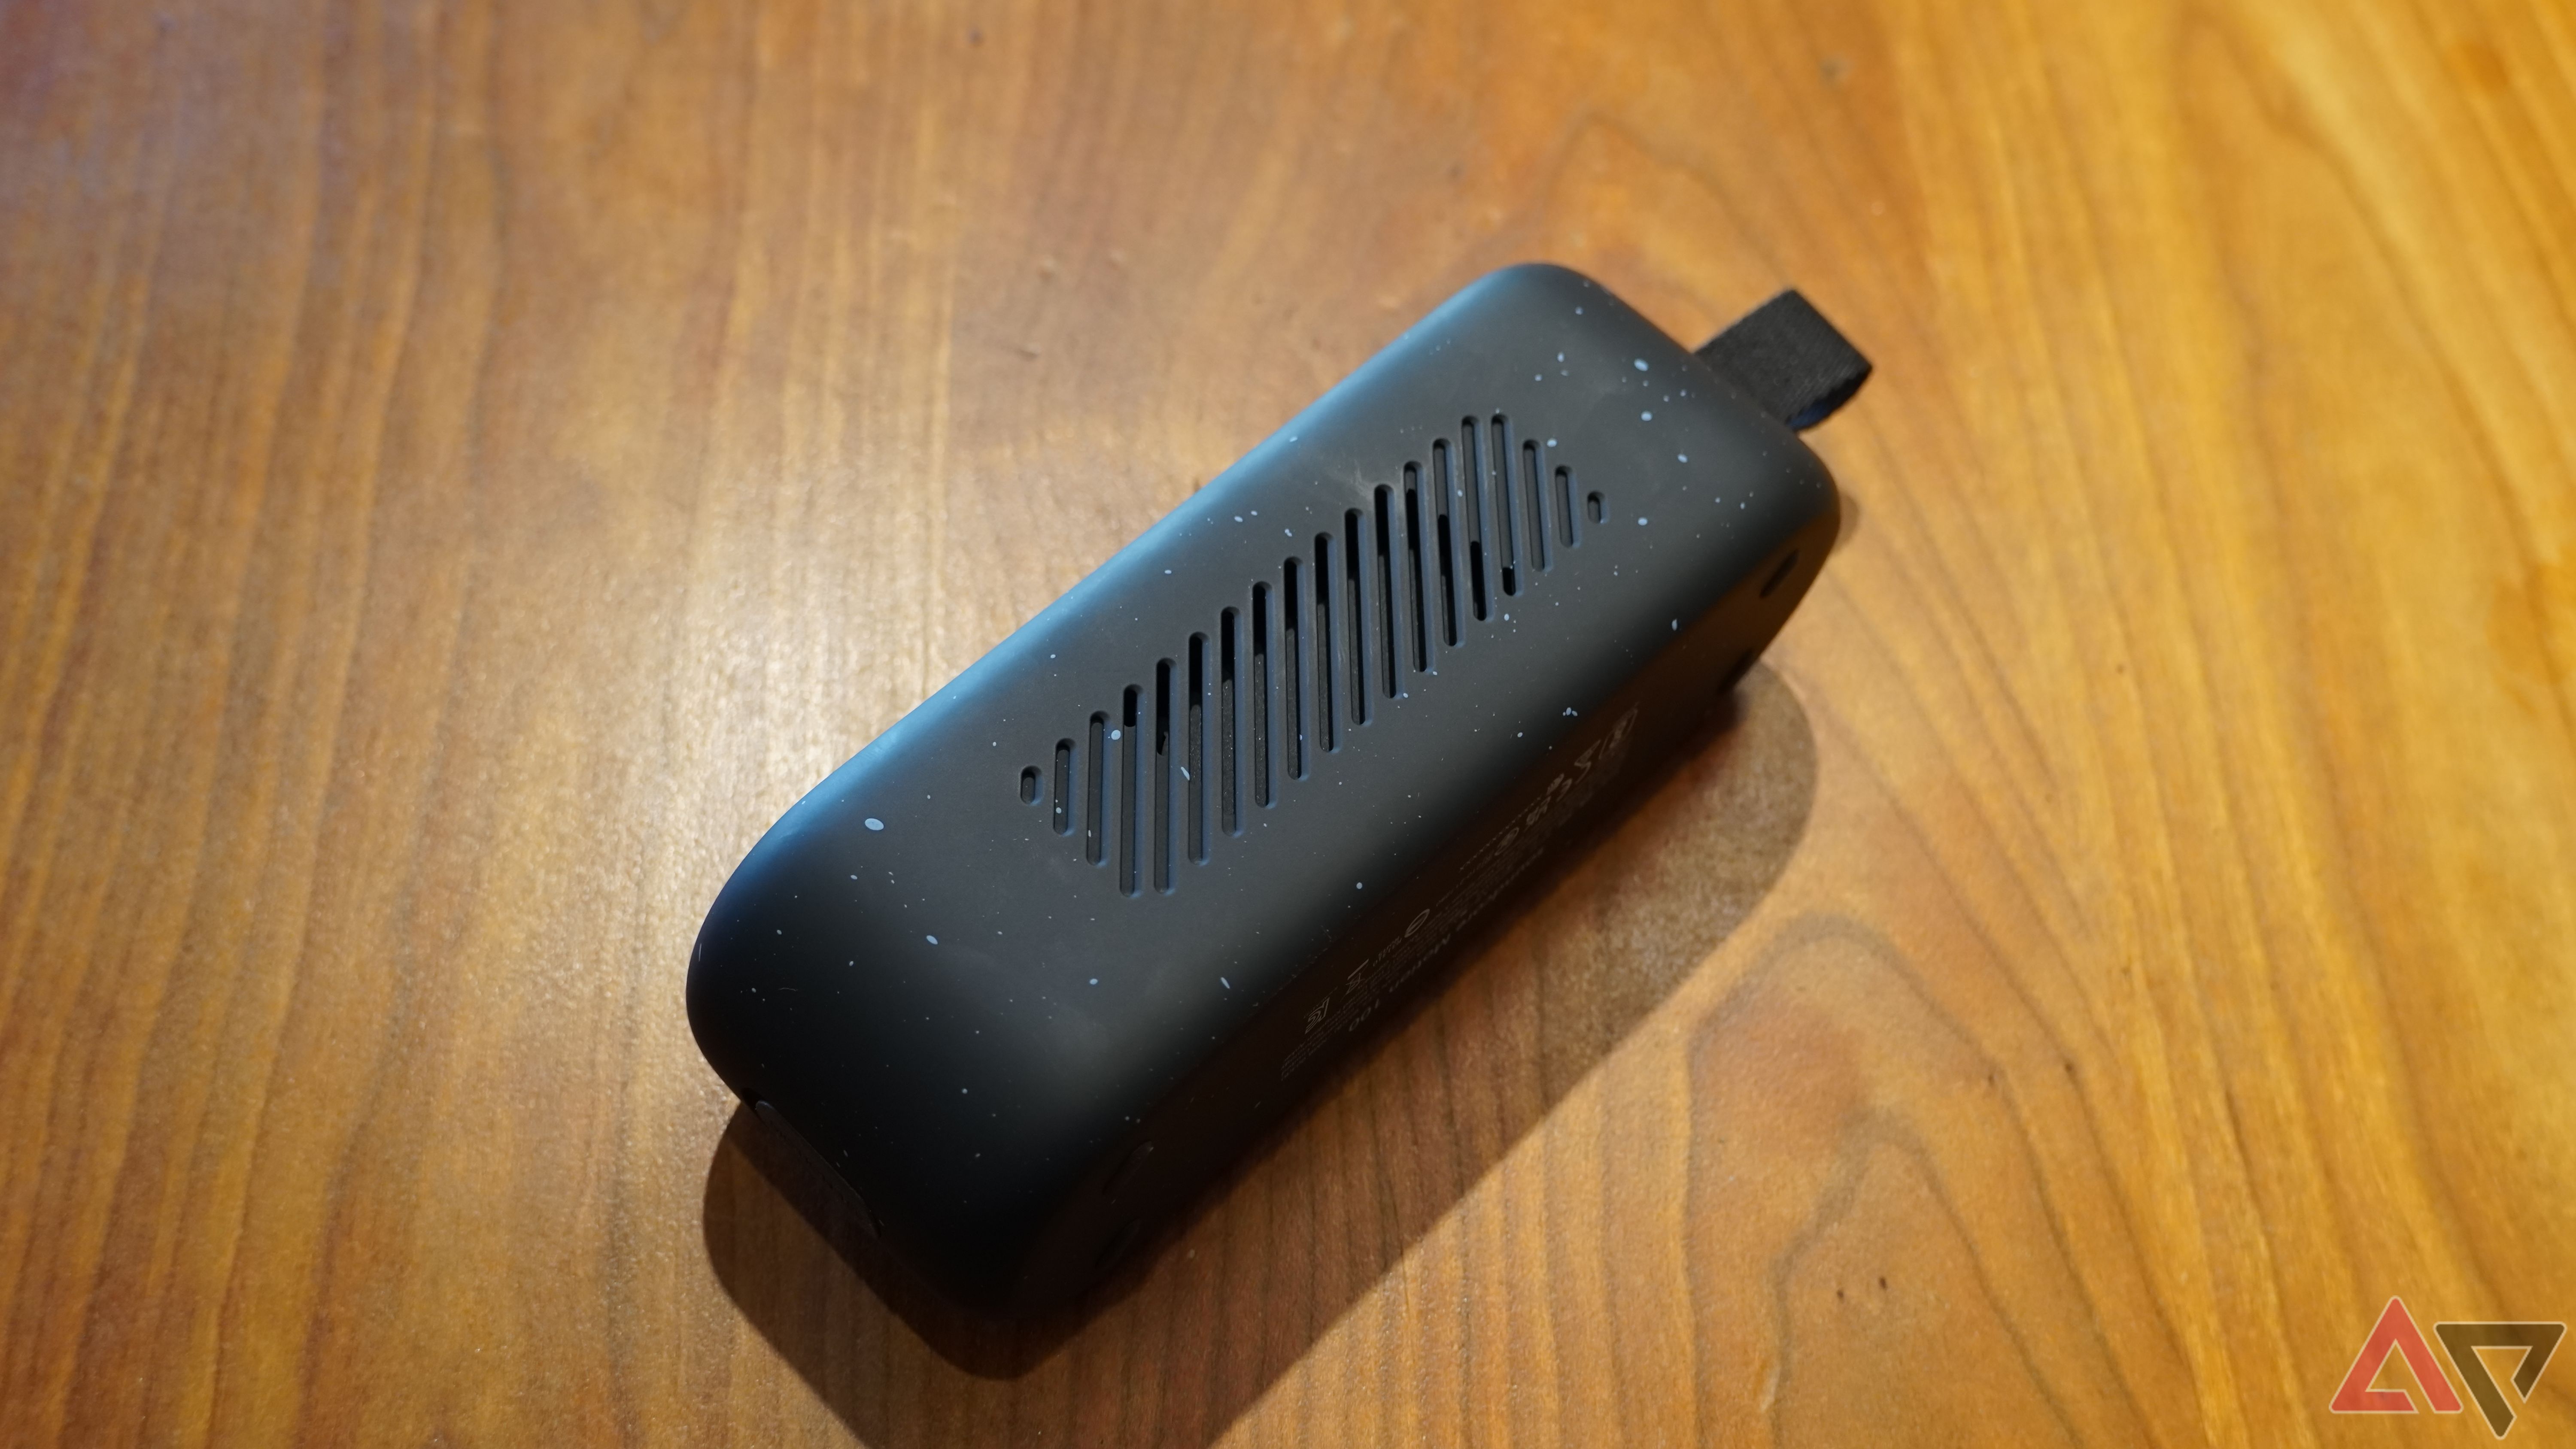 Anker Soundcore Motion Plus review: This bulked-up $100 Bluetooth